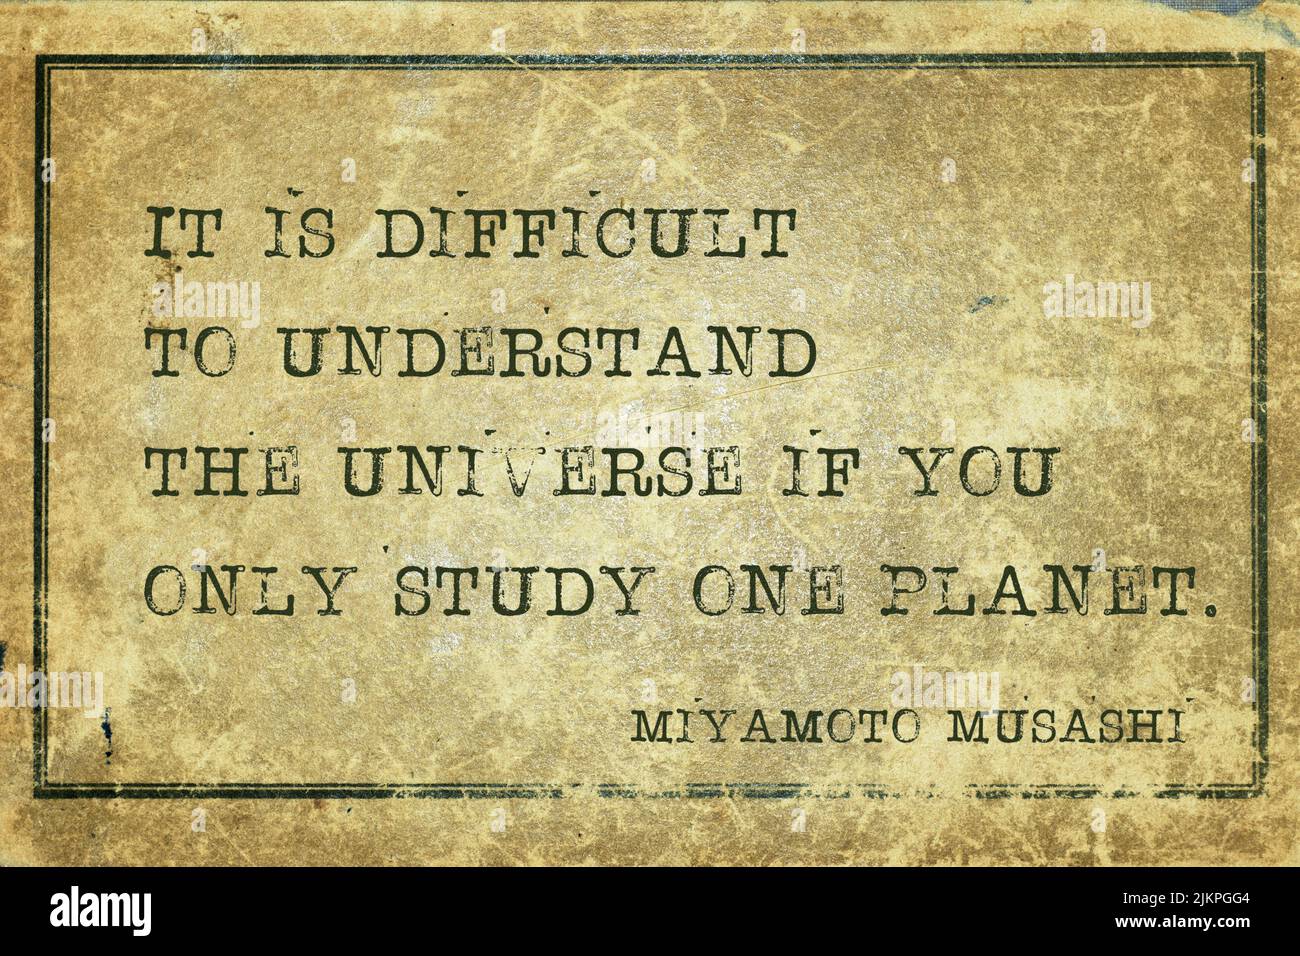 It is difficult to understand the universe if you only study one planet - ancient Japanese swordsman and ronin Miyamoto Musashi quote printed on grung Stock Photo